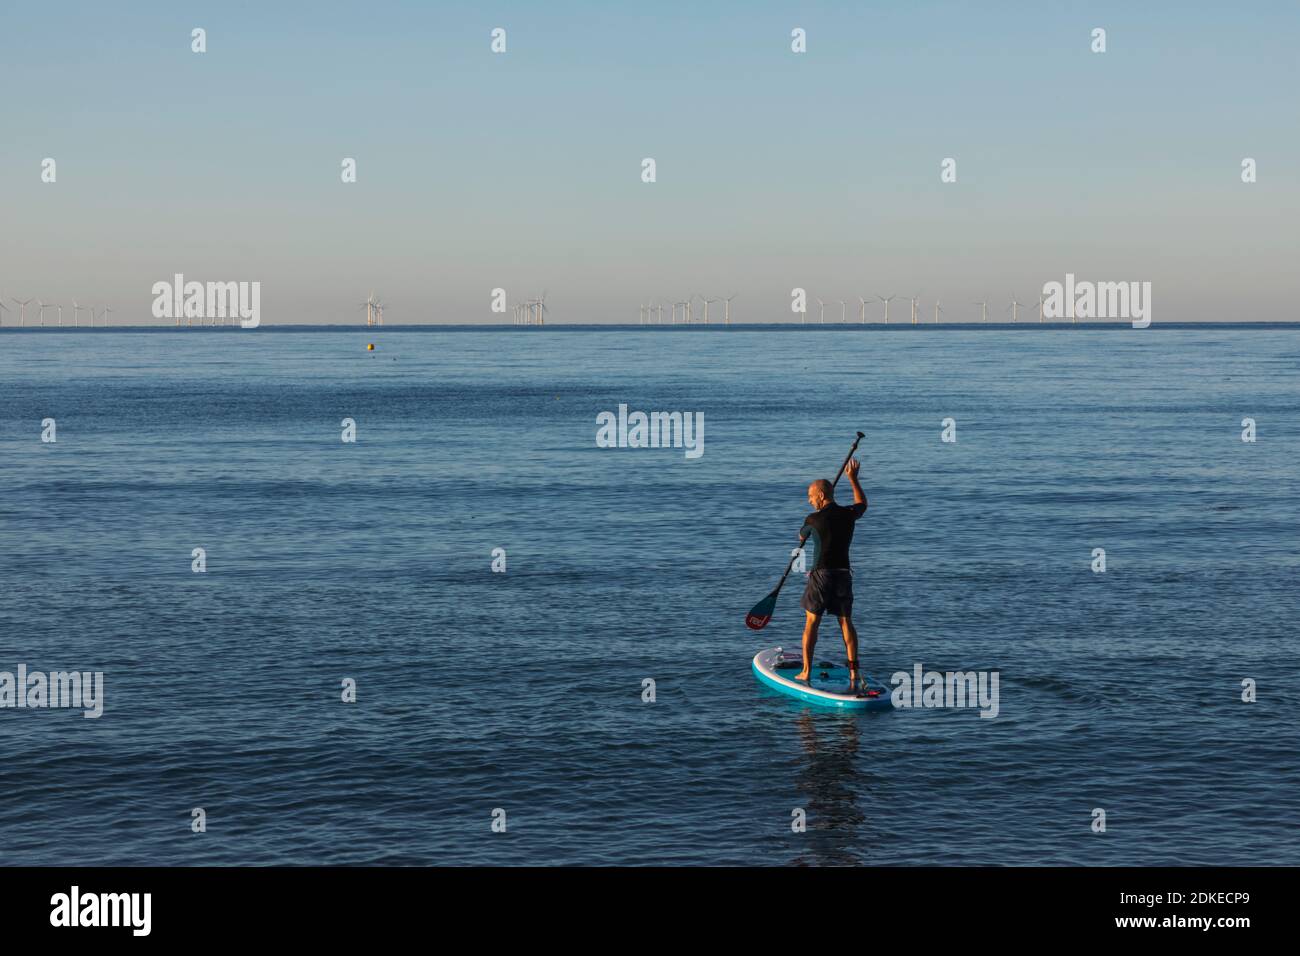 England, West Sussex, Worthing, Worthing Beach, Paddle Boarder on Calm Sea Stockfoto